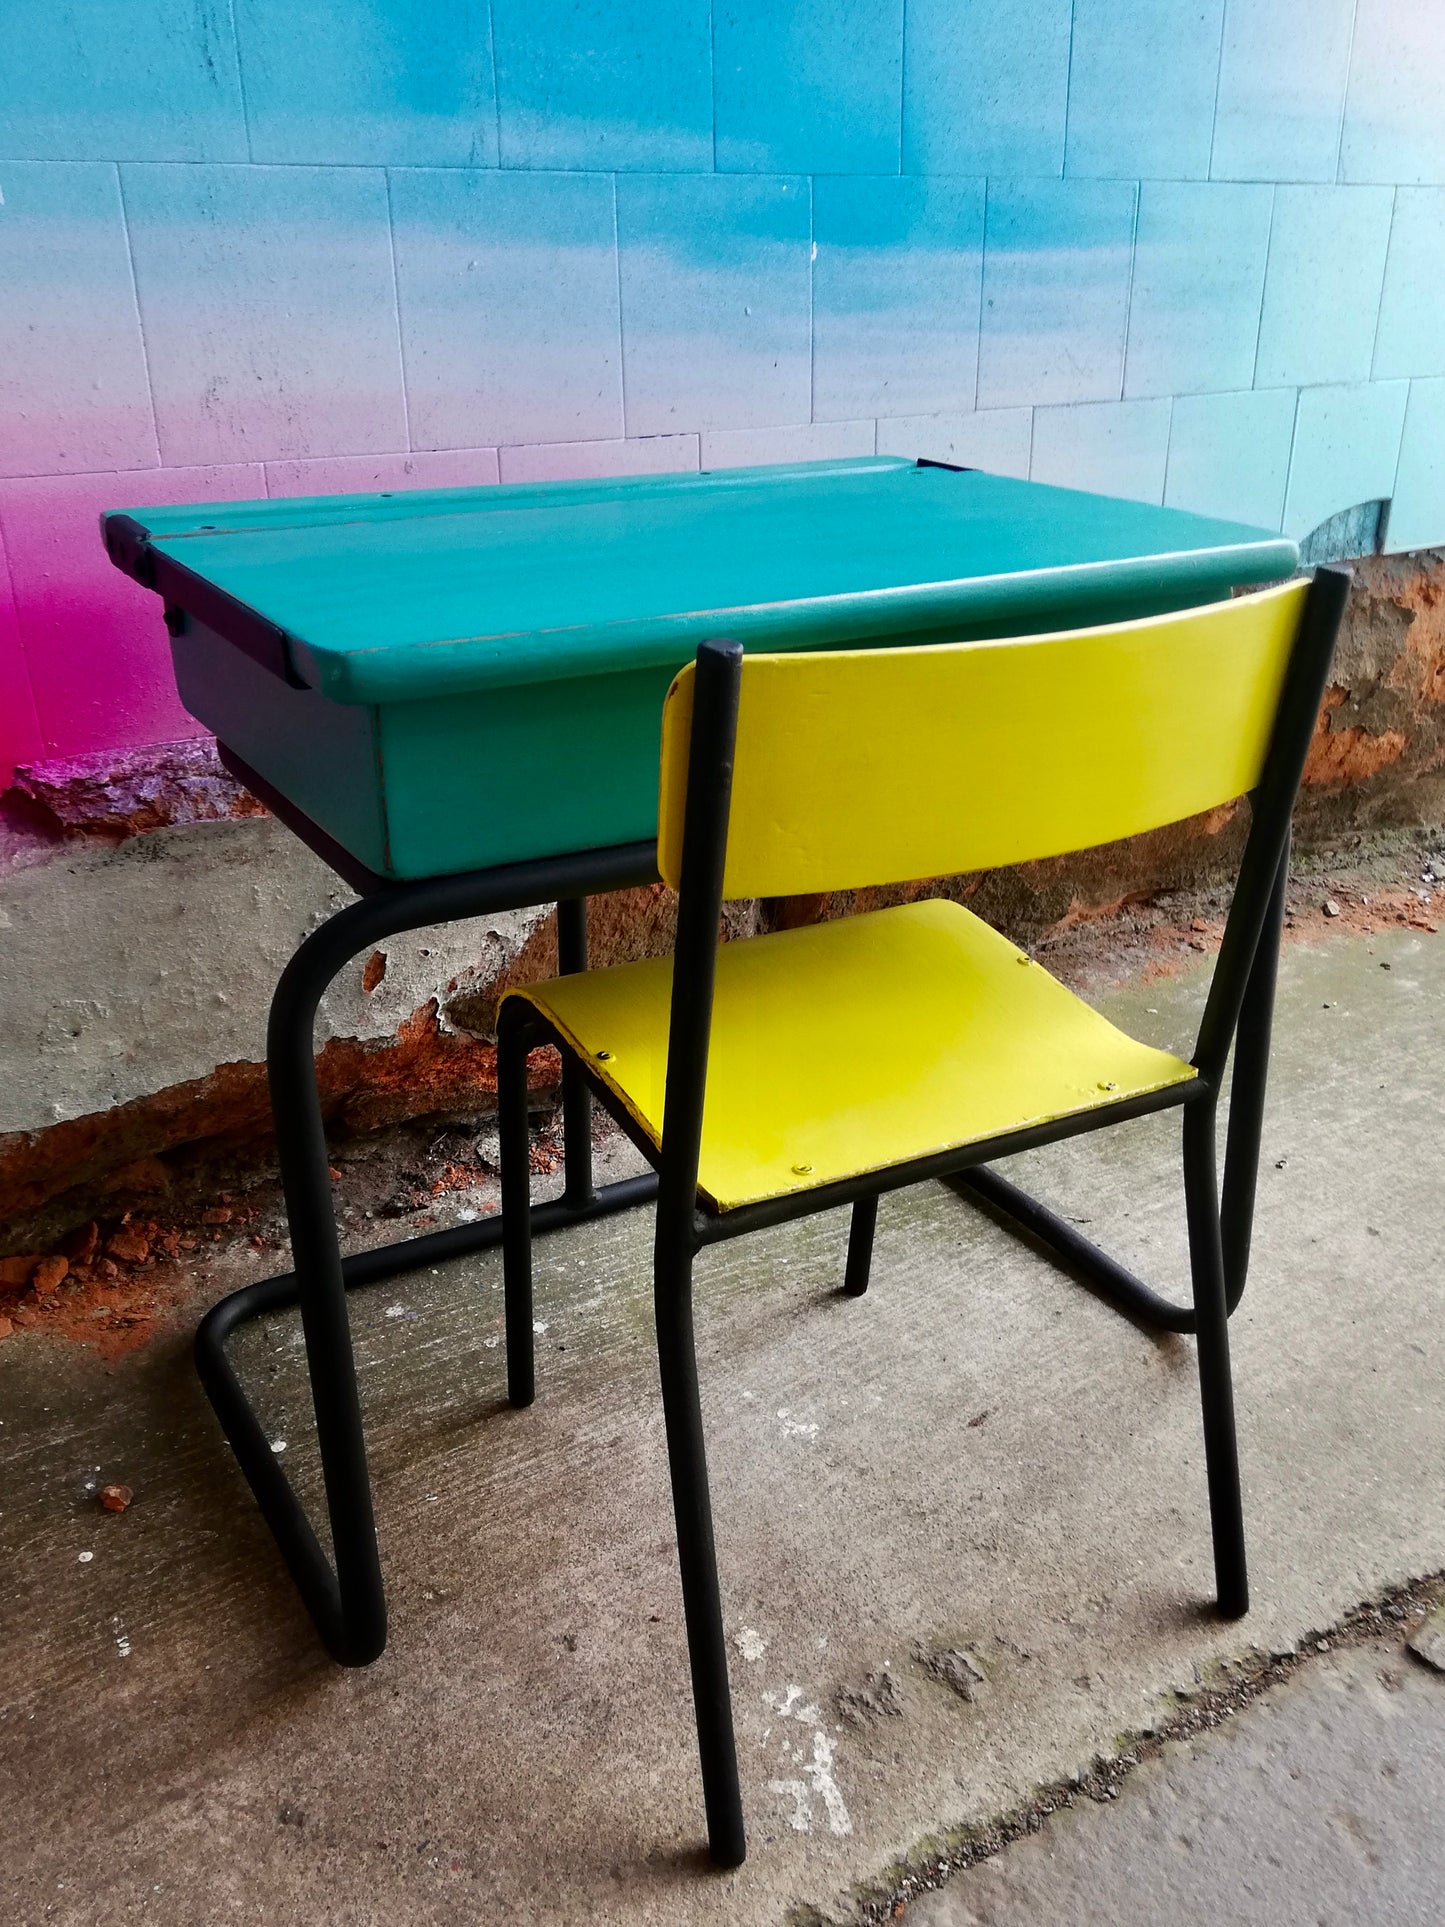 Commission for Victoria painted school desk and chair